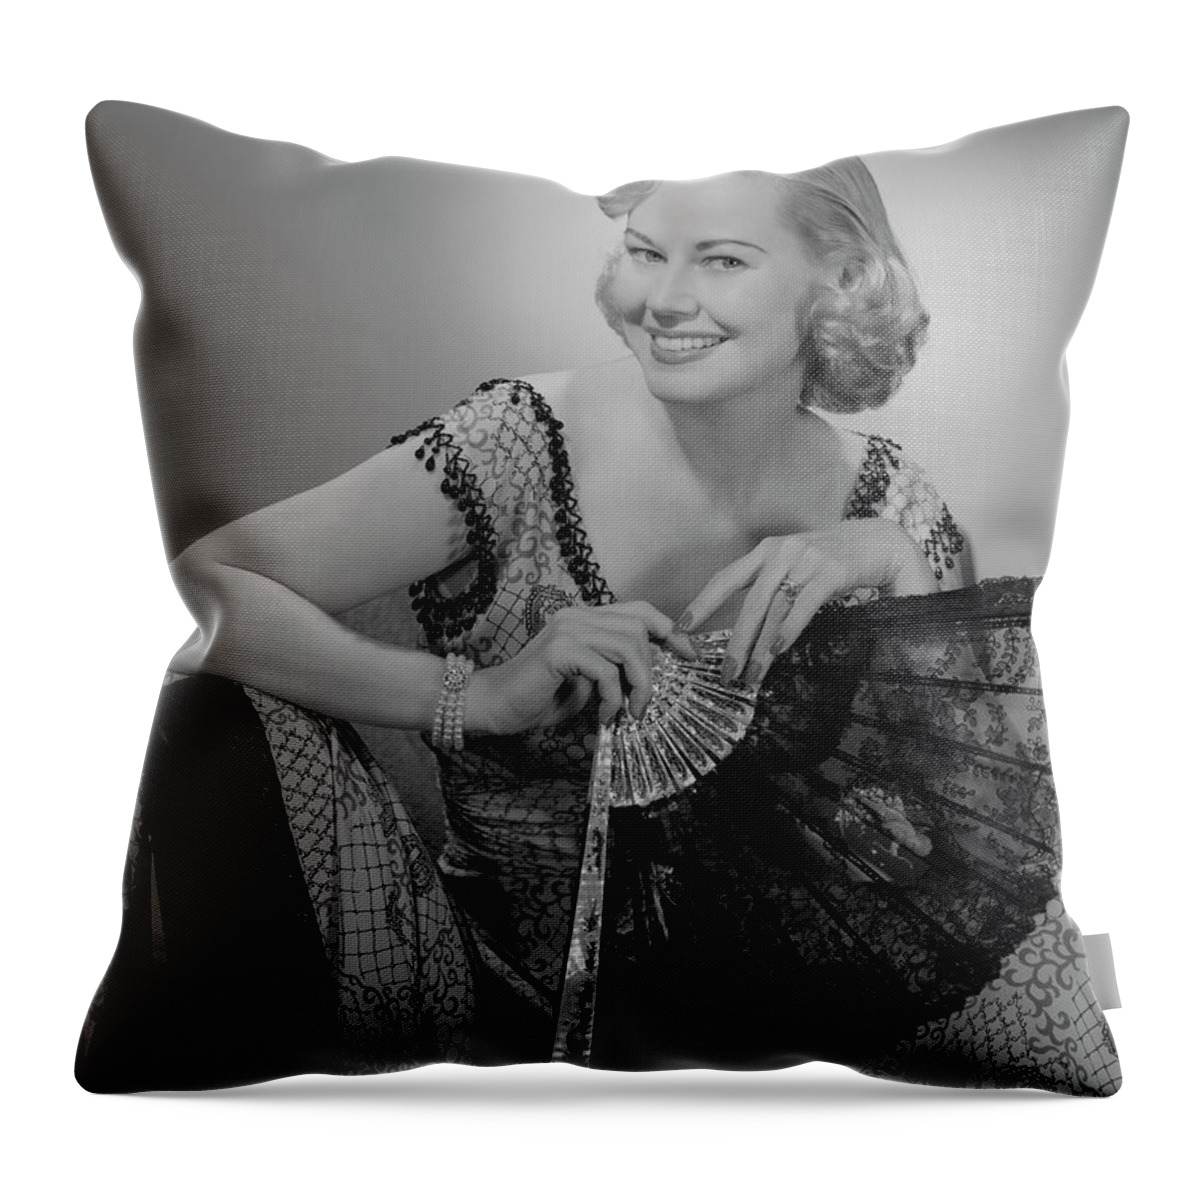 Three Quarter Length Throw Pillow featuring the photograph Young Woman Holding Fan, Portrait by George Marks